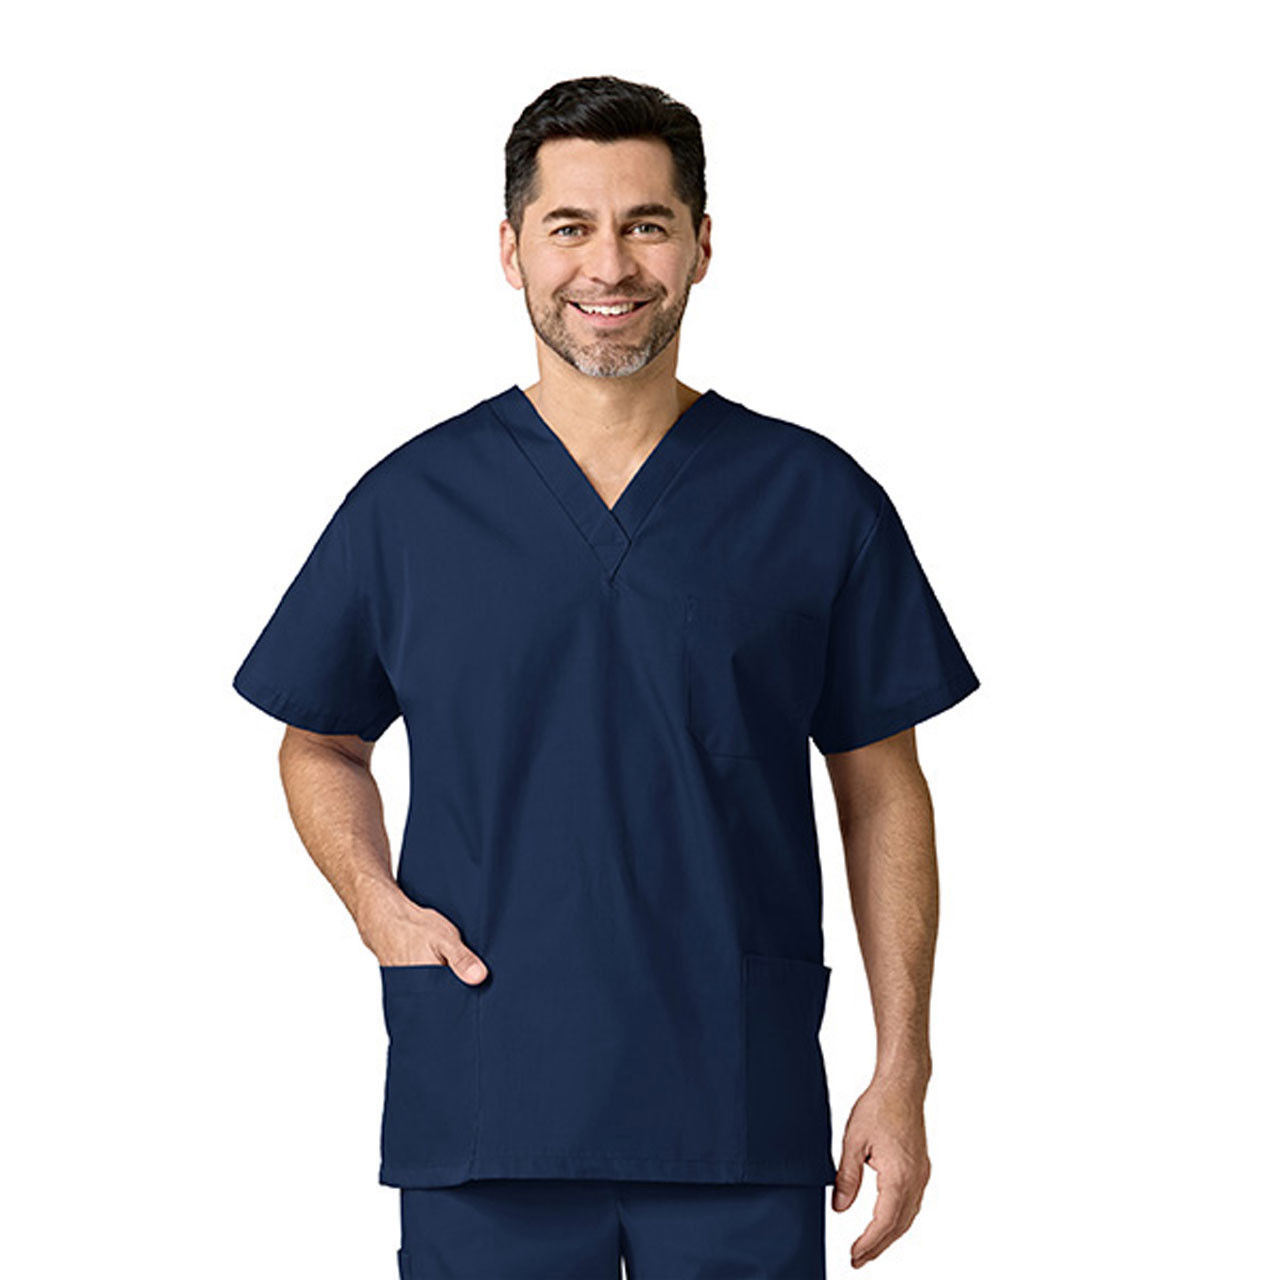 Where can the Navy Blue Scrub Tops be used?